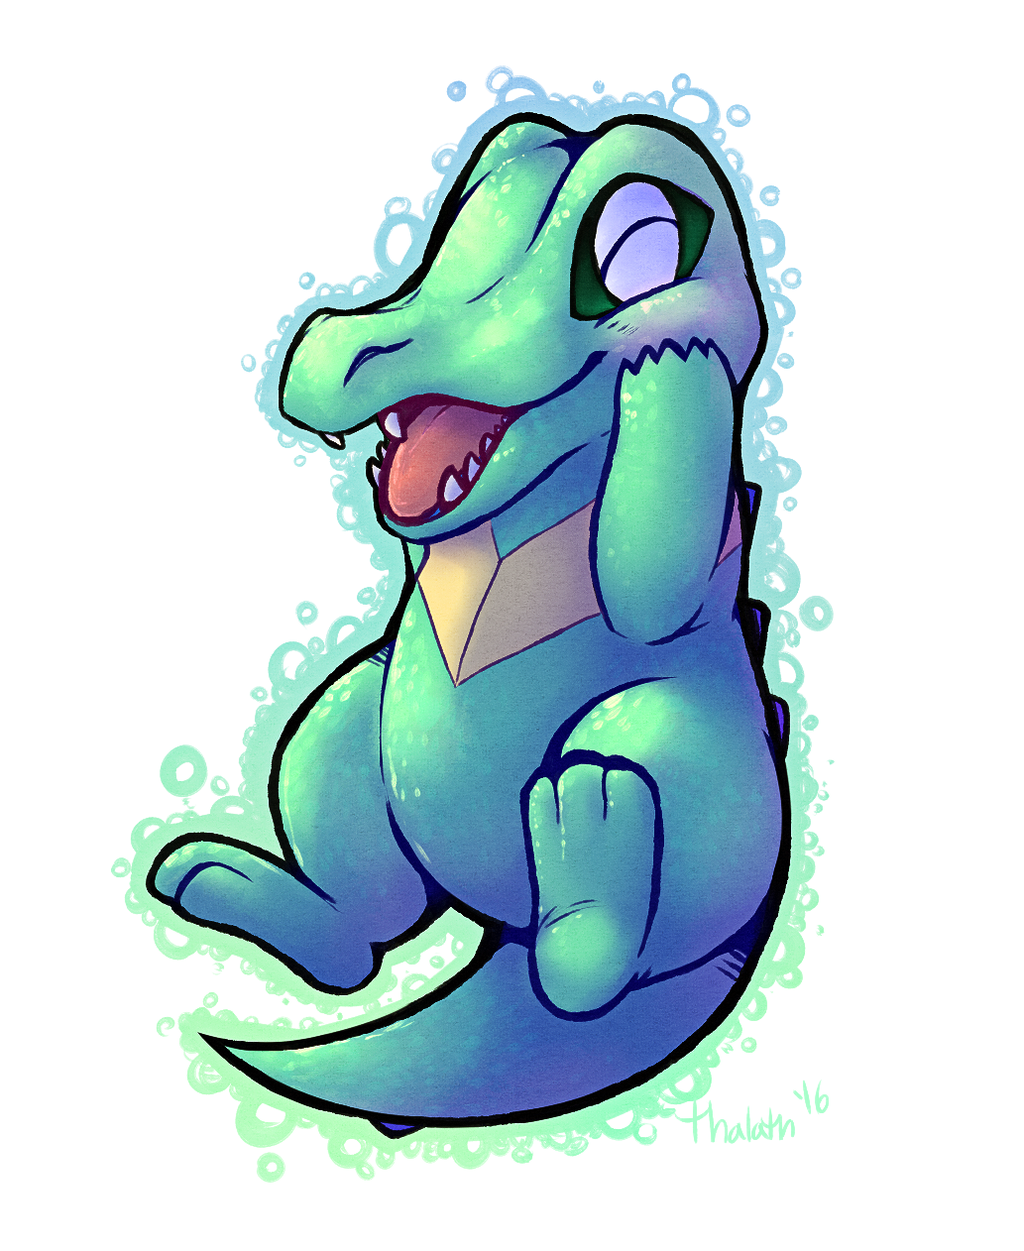 Most recent image: 158 - Shiny Totodile